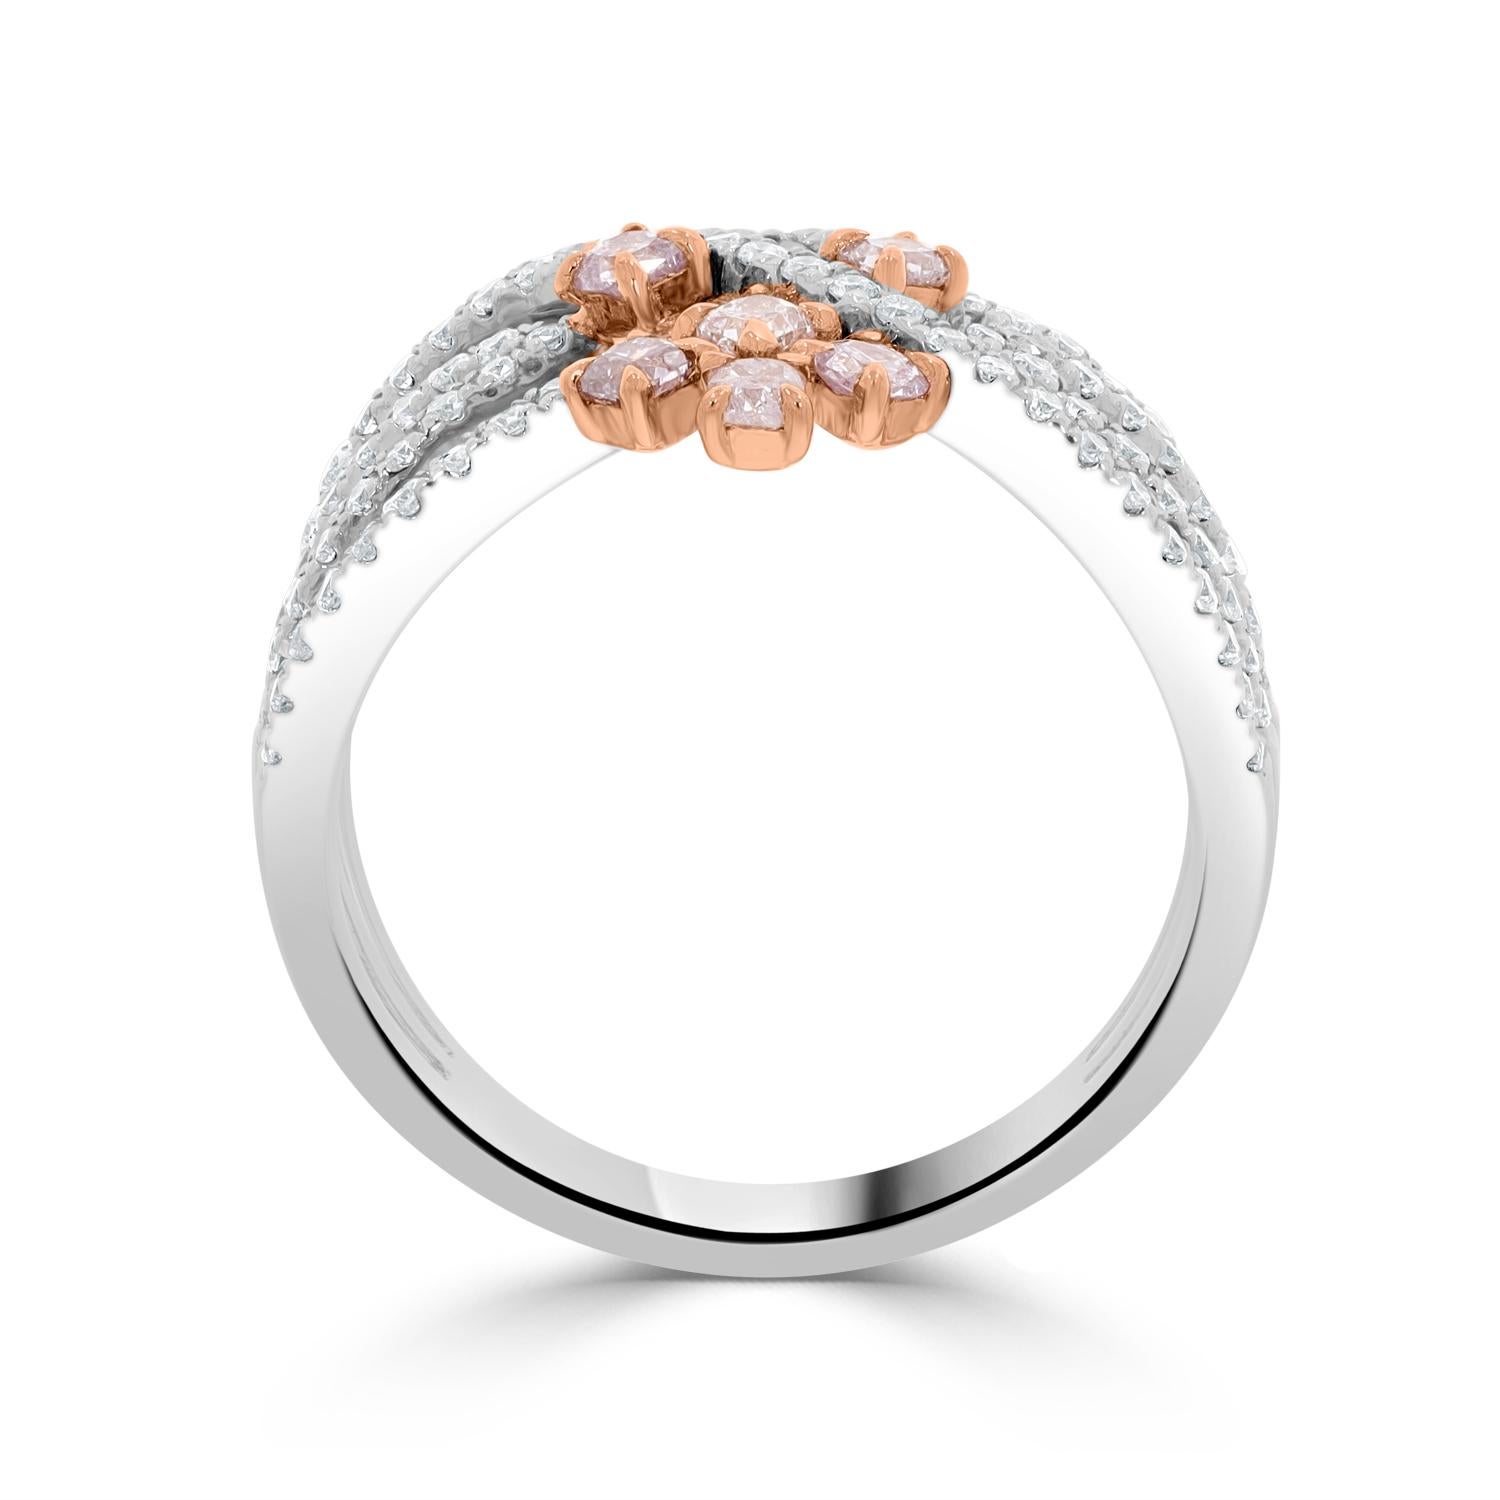 This ring is sure to be a treasured addition to your jewelry collection. Designed of 14k two-tone gold, this ring is treasured for its natural beauty and radiance. To add further brilliance, this ring is set with cushion-cut pink Diamond and round